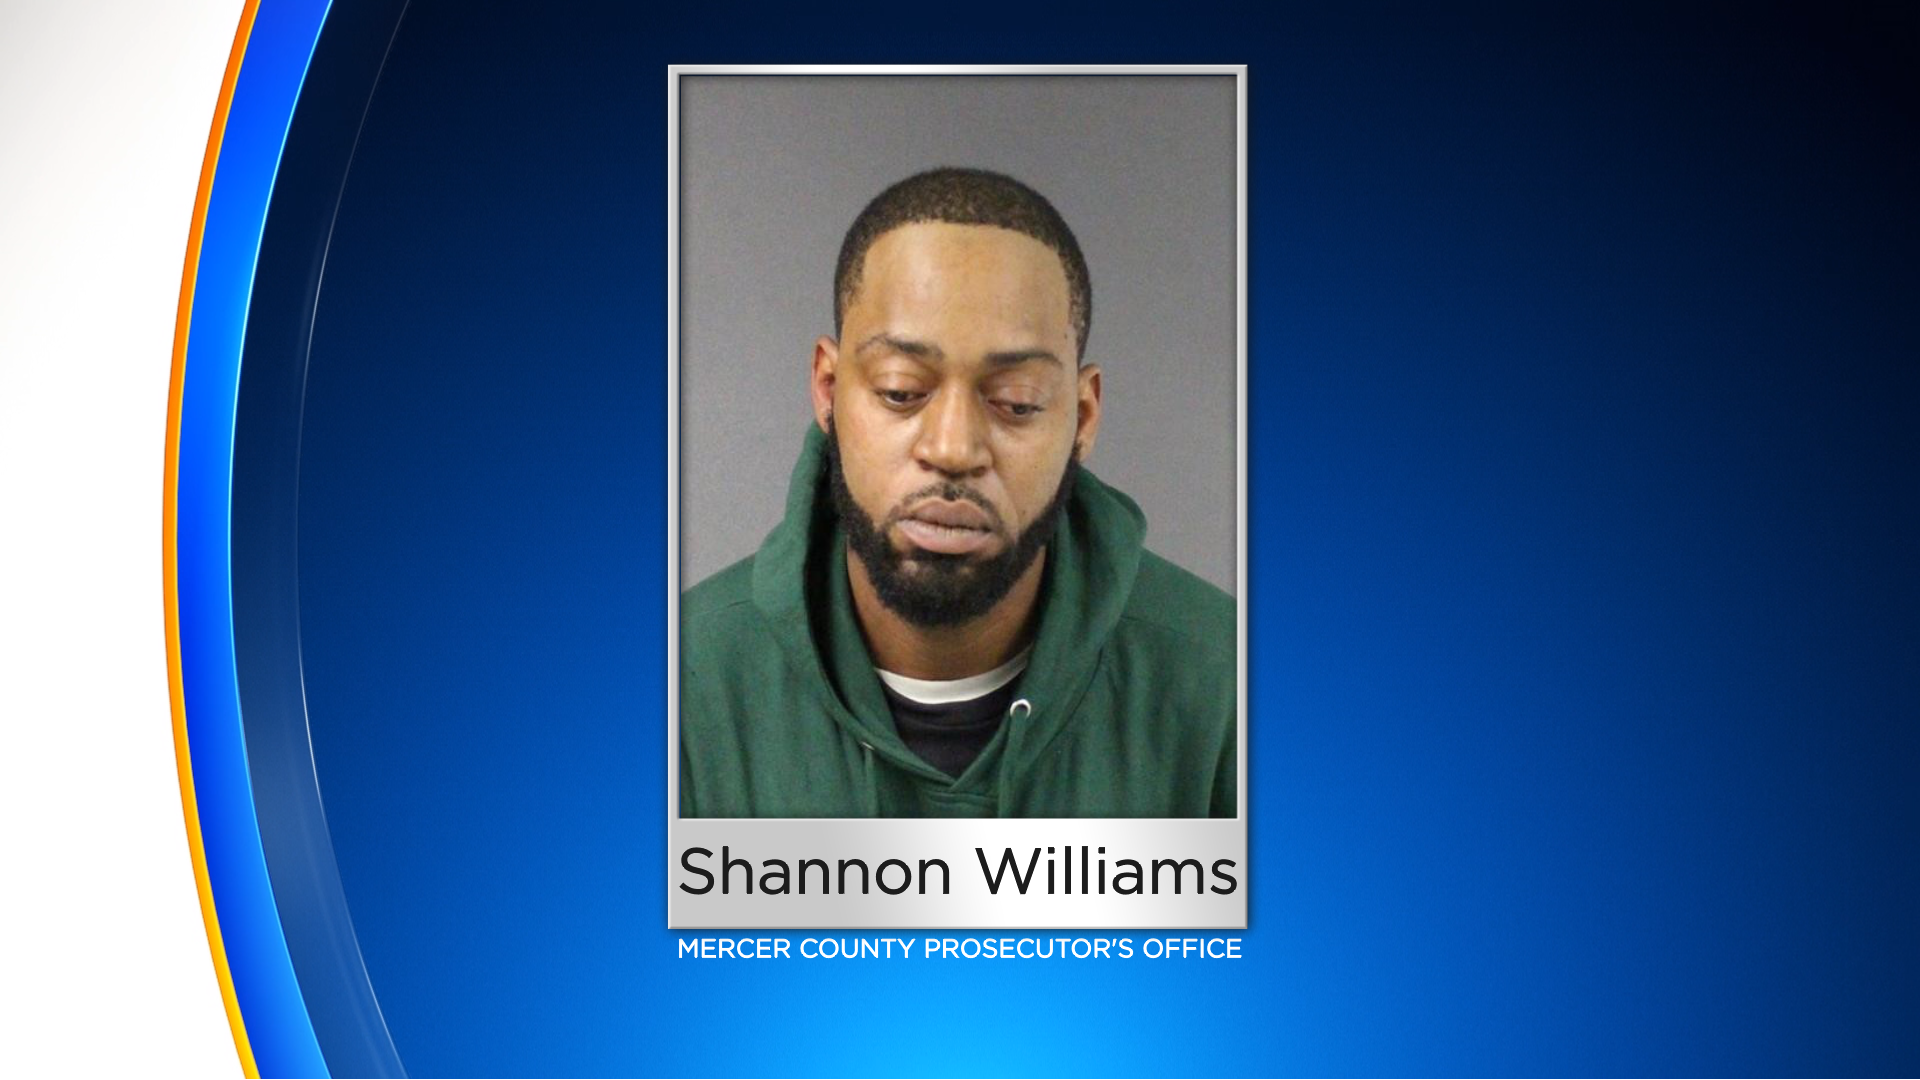 Trenton Man, Shannon Williams, Arrested, Charged In Connection To New Year's Eve Homicide, Officials Say